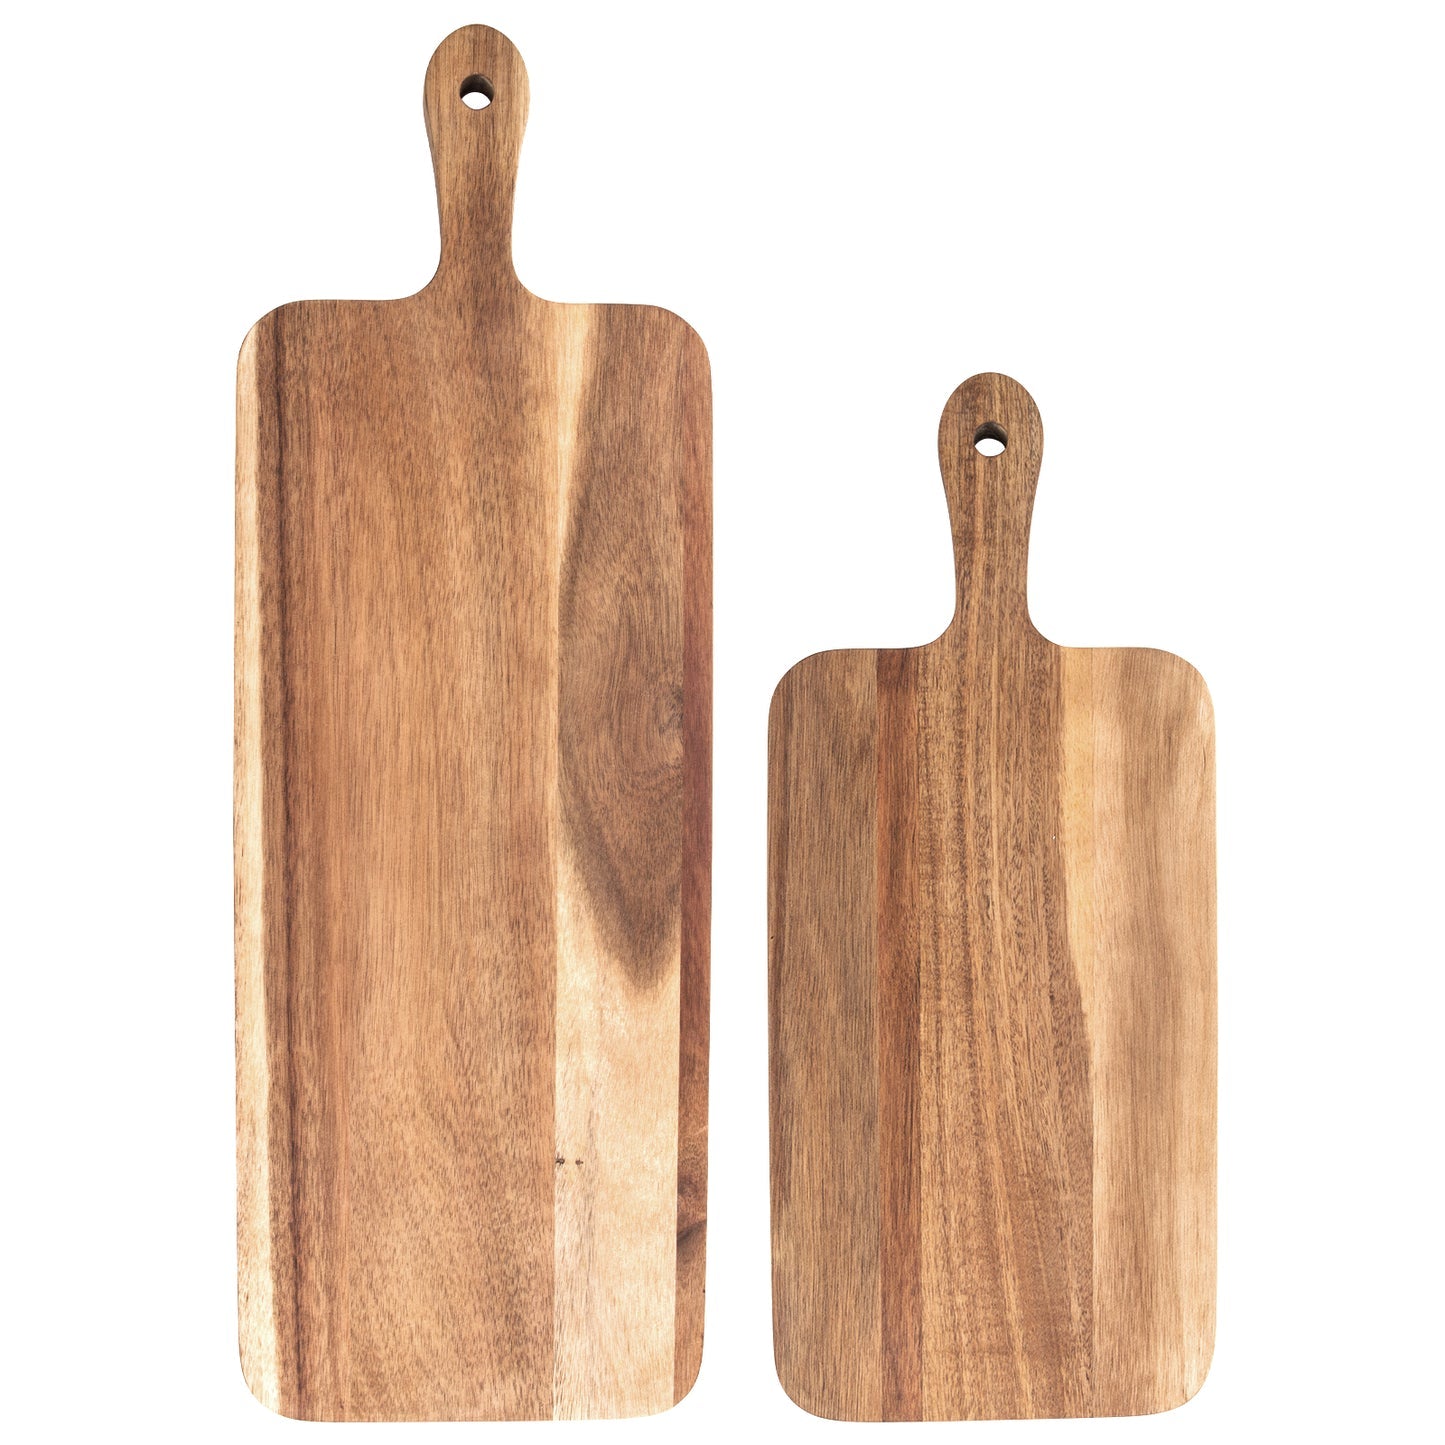 Wooden Cutting Board Set of 2